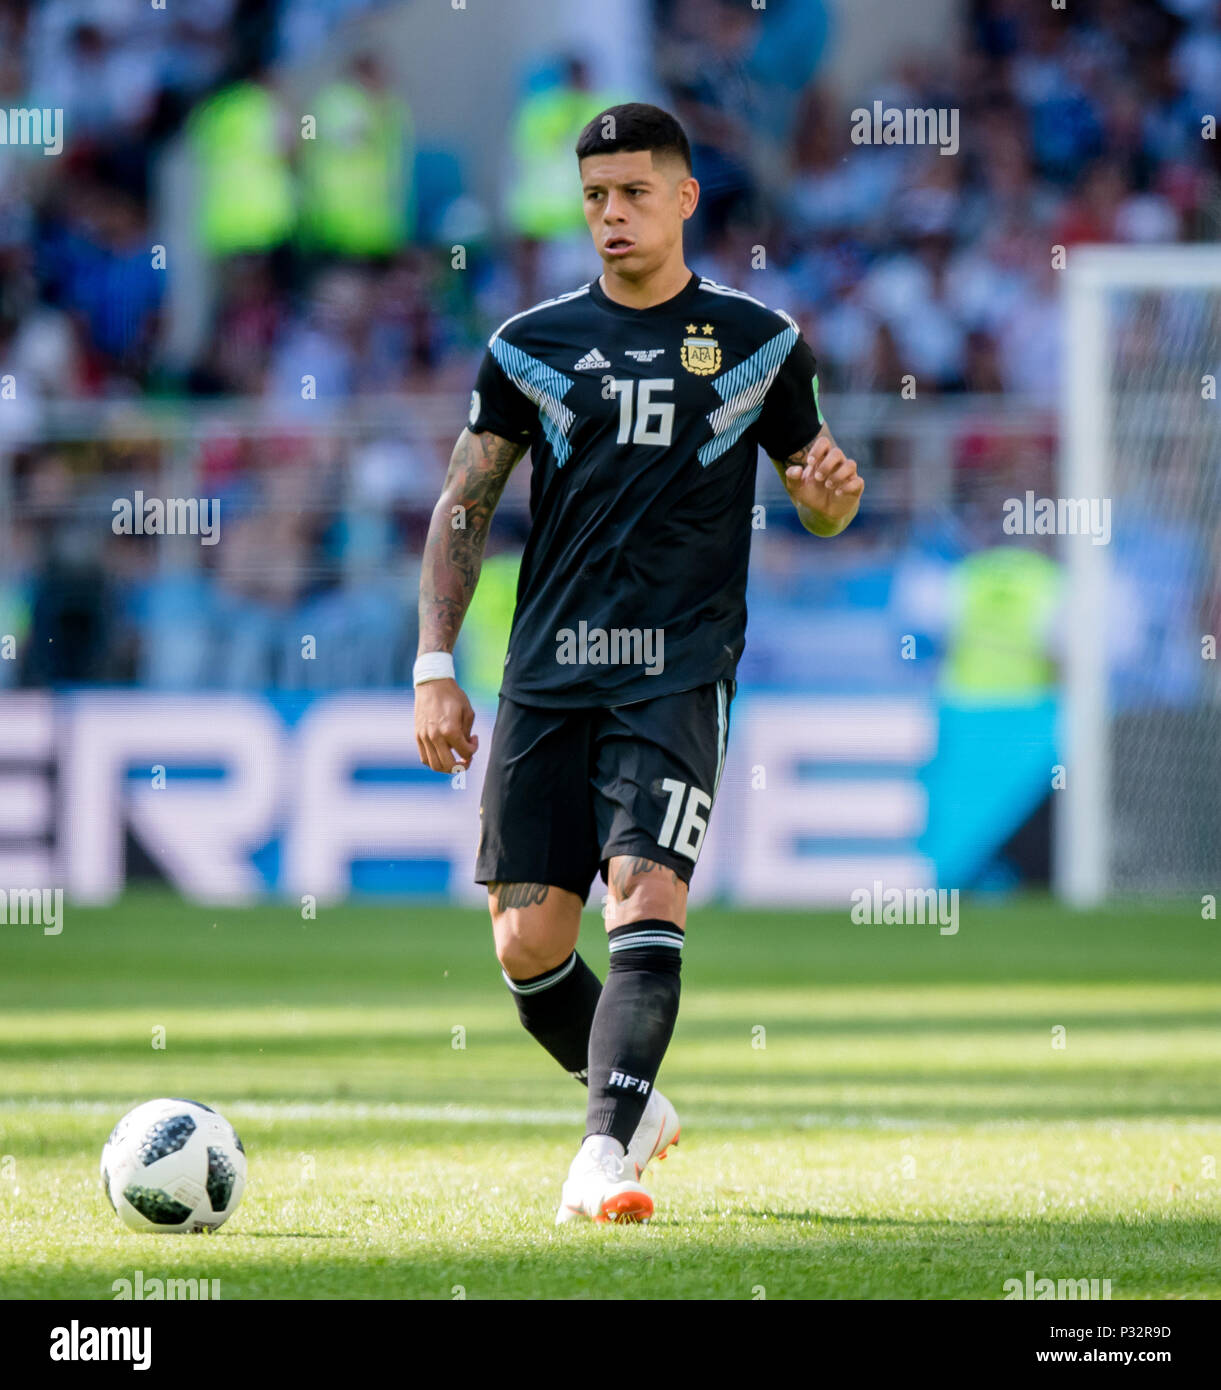 Marcos Rojo (Argentina) GES / Football / World Cup 2018 Russia: Argentina - Iceland, 16.06.2018 GES / Soccer / Football / World Cup 2018 Russia: Argentina vs. Iceland, City, June 16, 2018 | usage worldwide Stock Photo